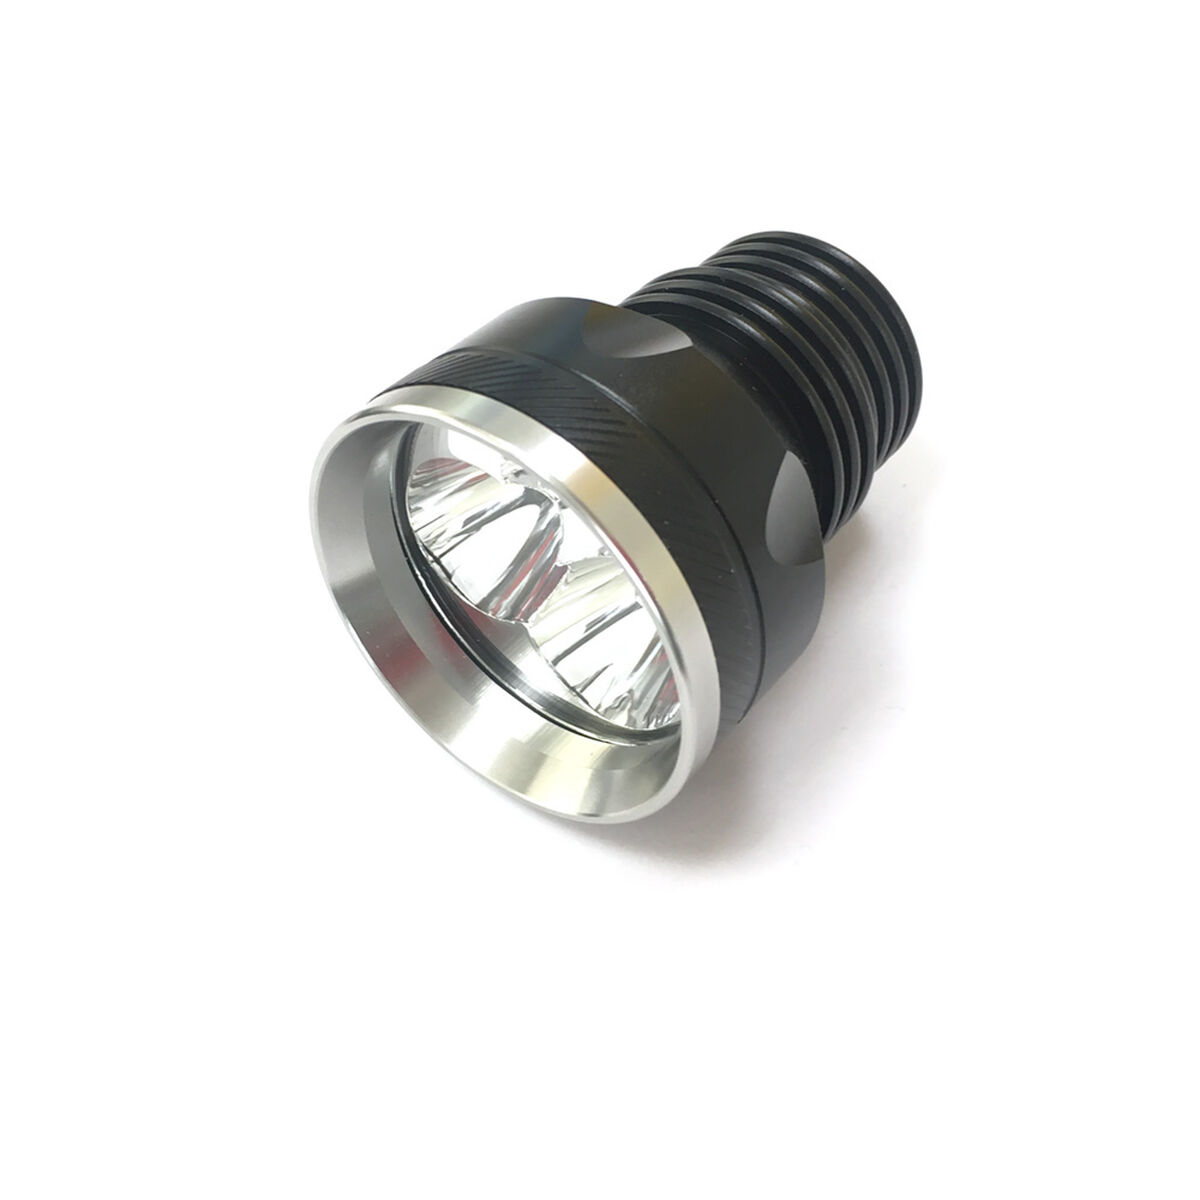 LED spotlight EDM 36106 Replacement Torch 30 W 2400 Lm